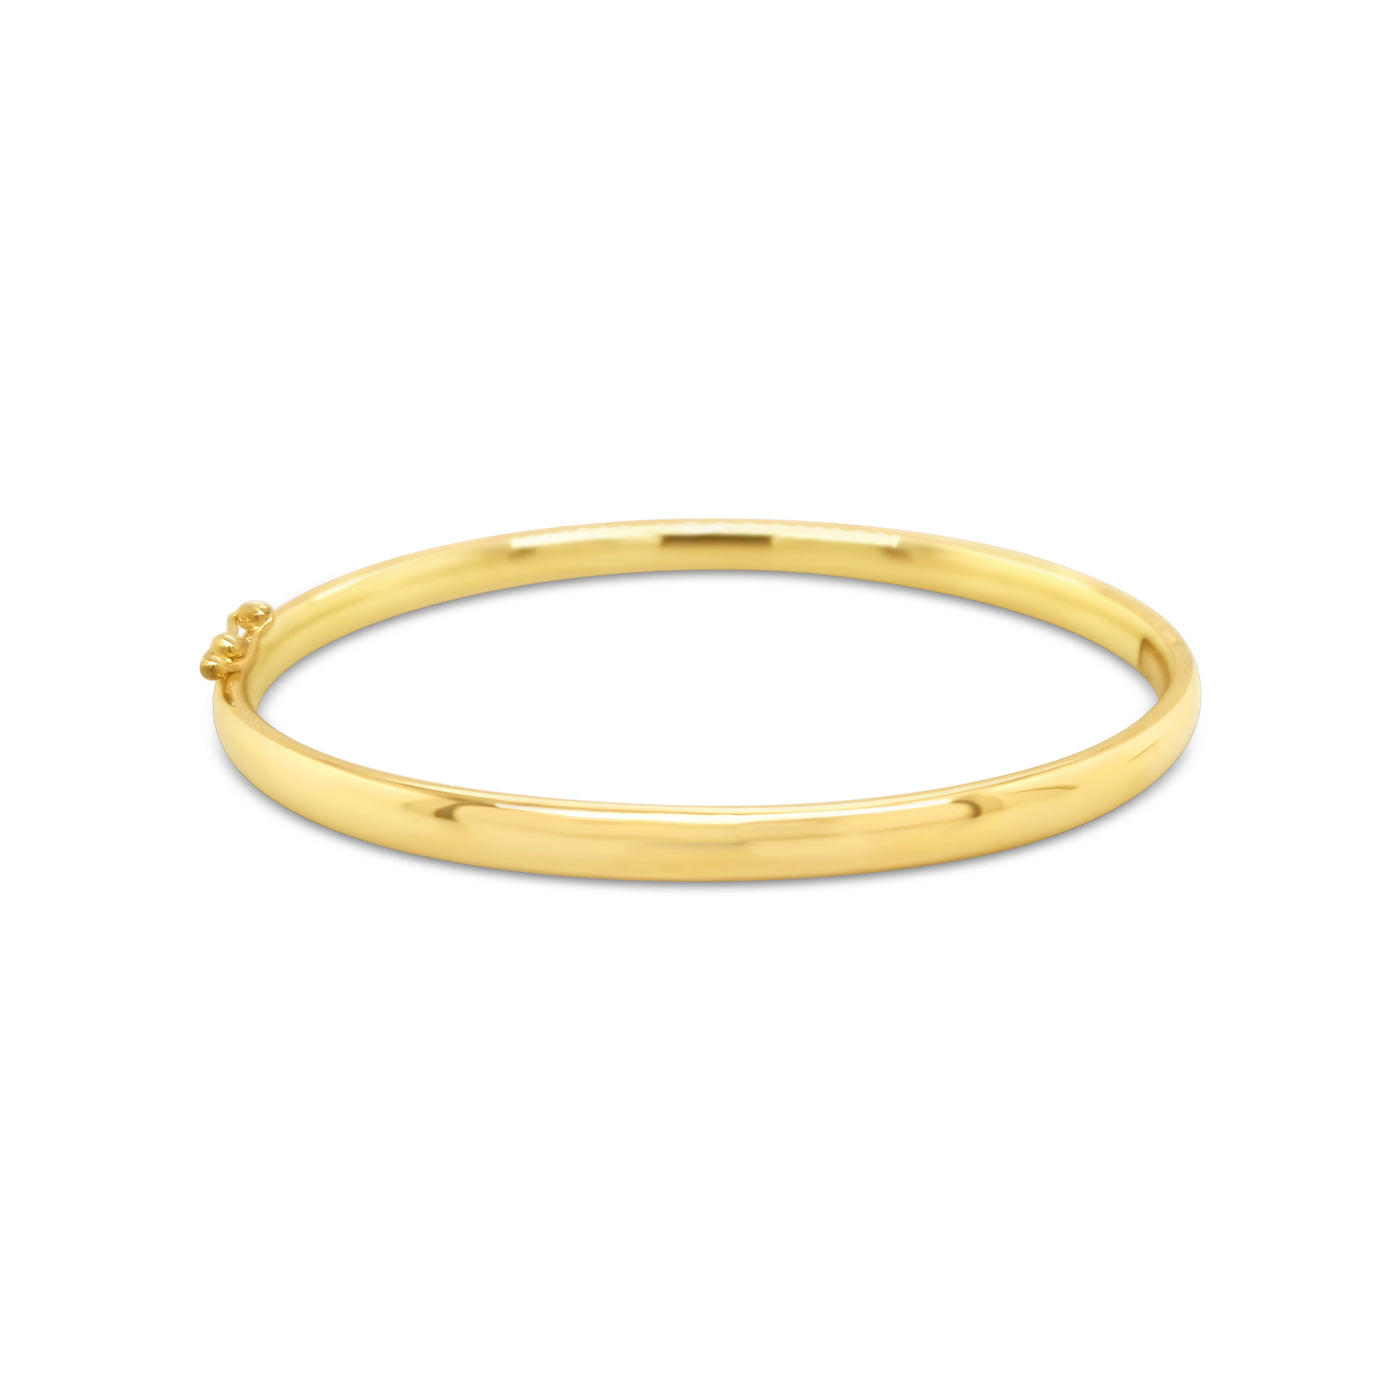 9k Yellow Gold Oval Hinged Bangle (Curved Edge)